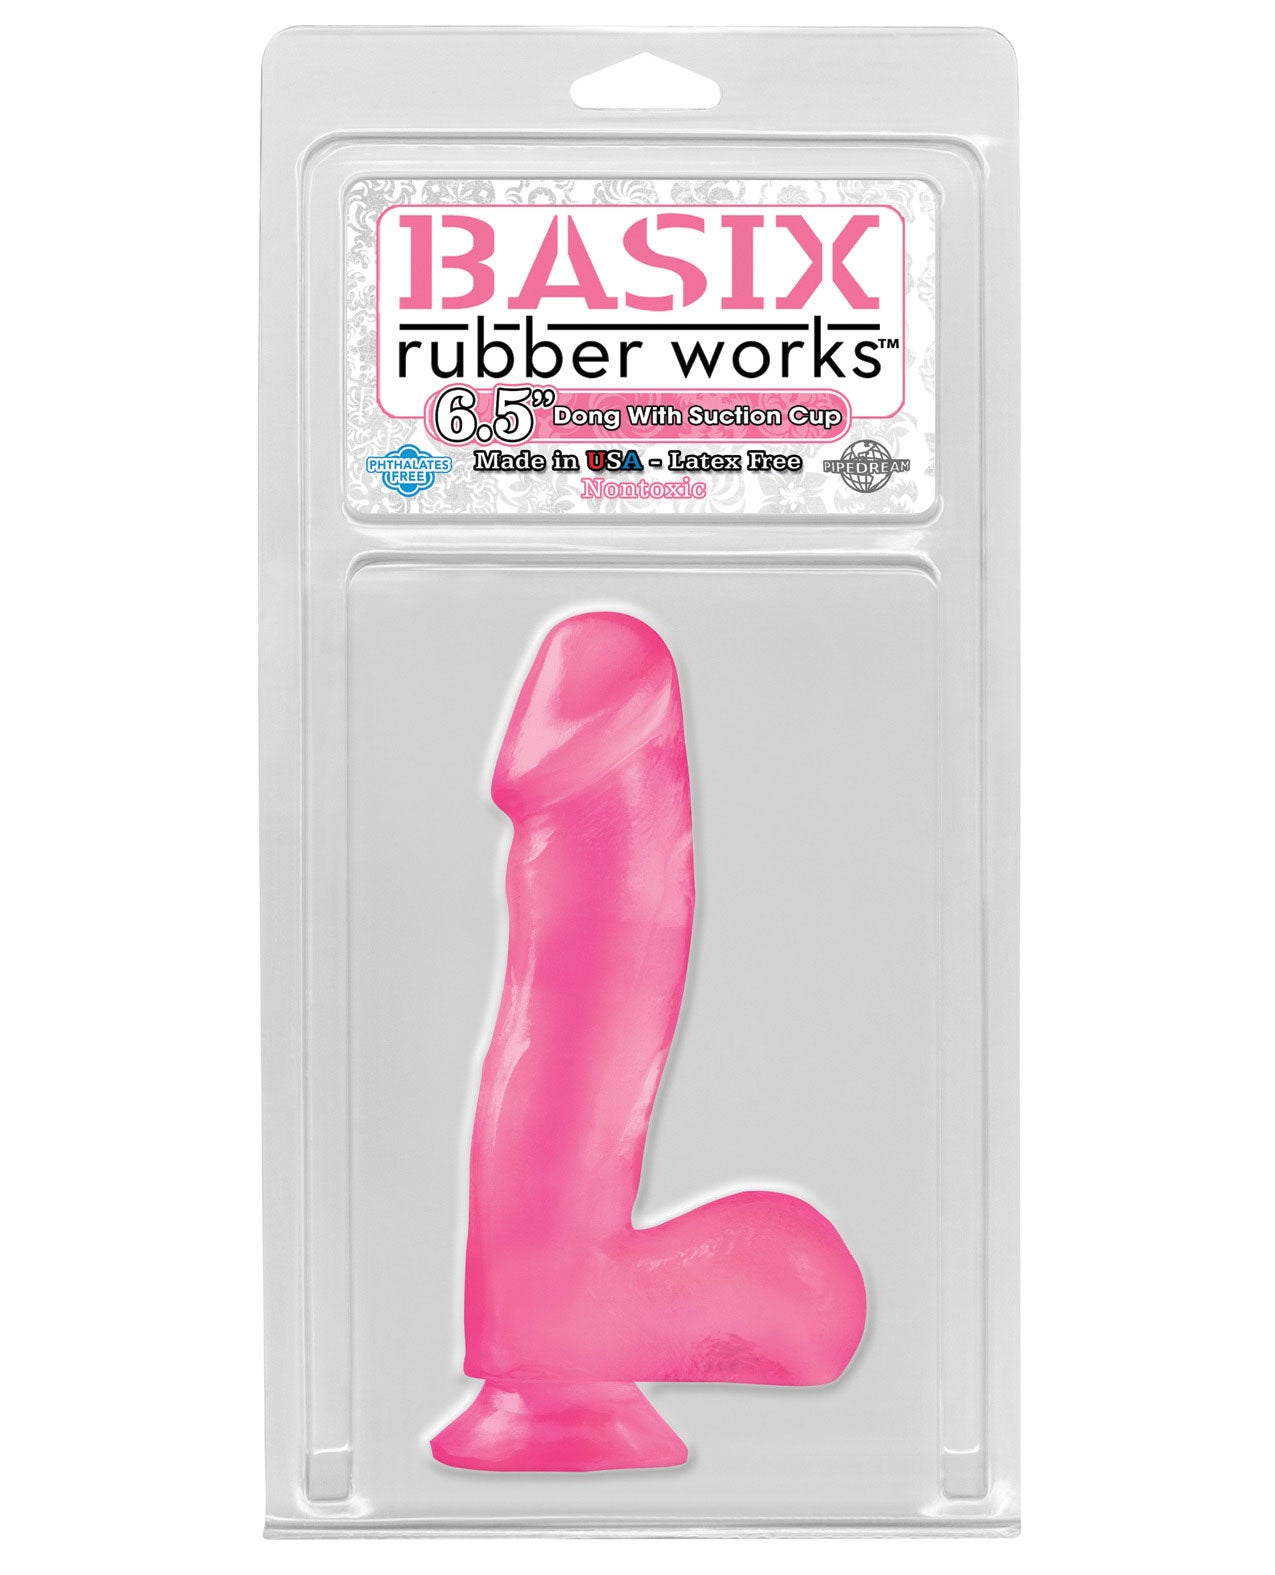 Basix Rubber Works 6.5" Dong W-suction Cup - Pink - LUST Depot